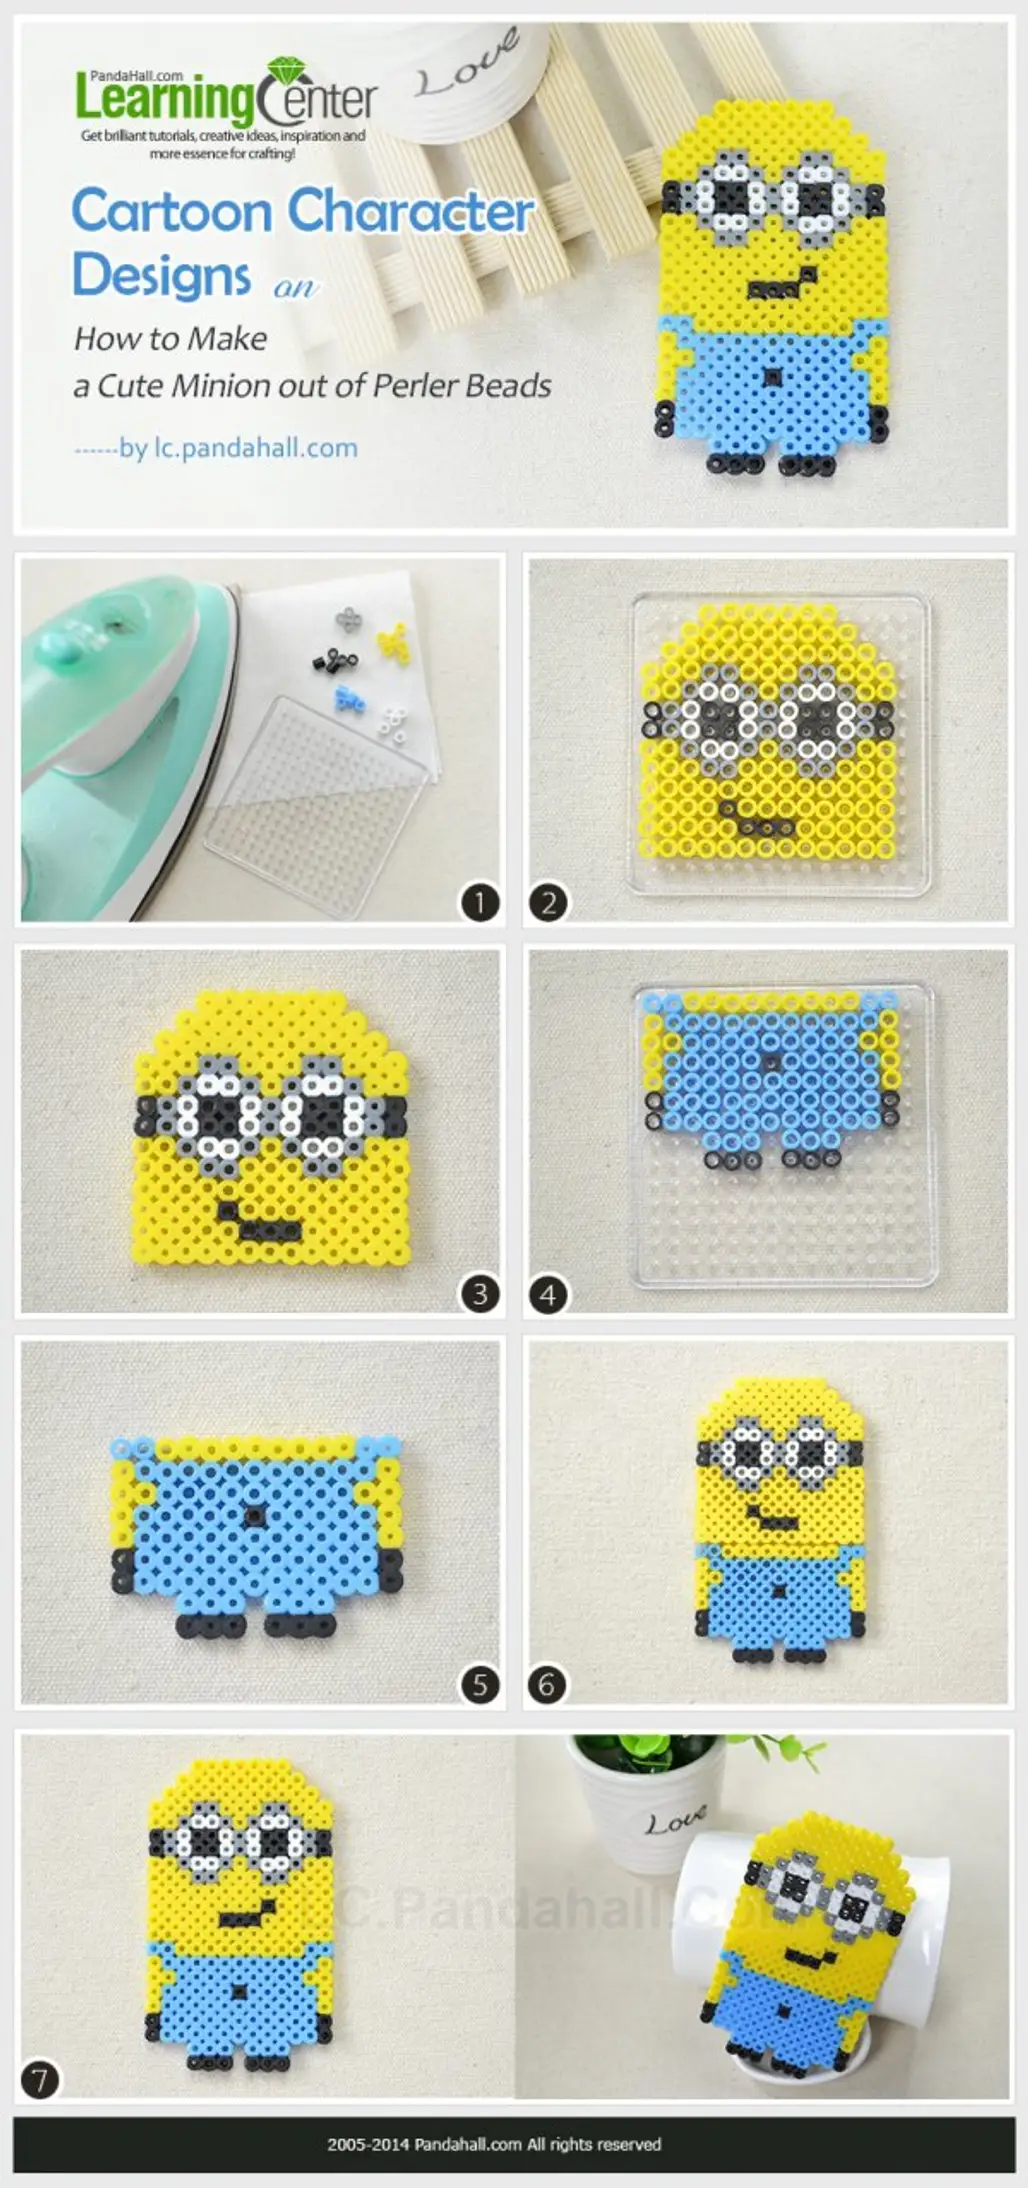 How to Make a Cute Minion out of Perler Beads